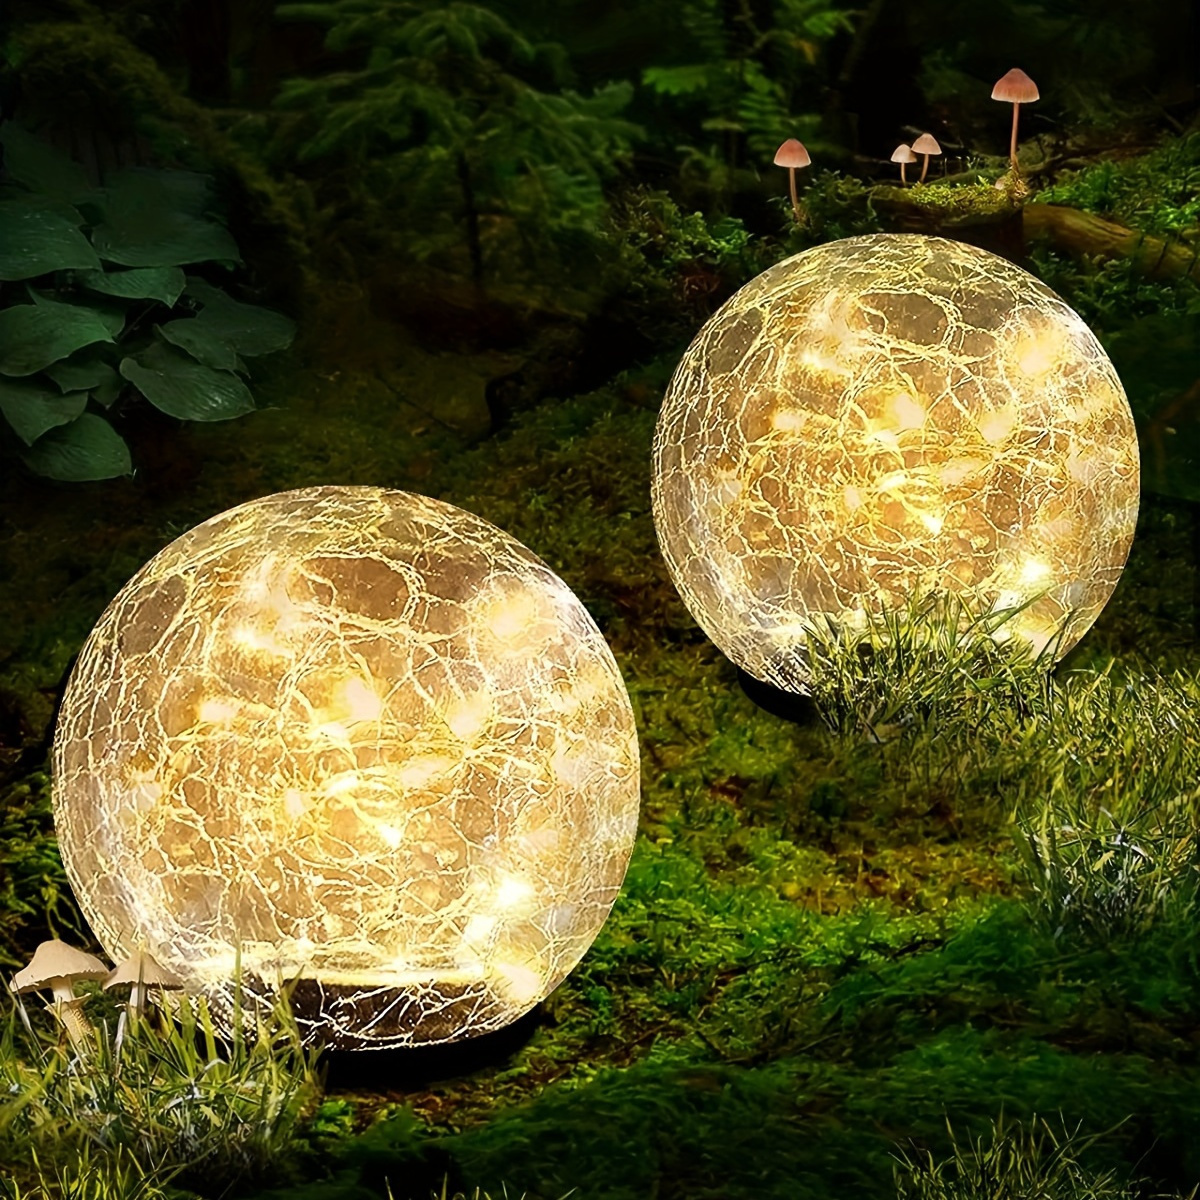 

Solar-powered Garden Lights - Warm White Led, Cracked Glass Ball Design For Outdoor Decor, Pathway, Patio & Lawn - 3.9", 4.7", 5.9" Sizes Available